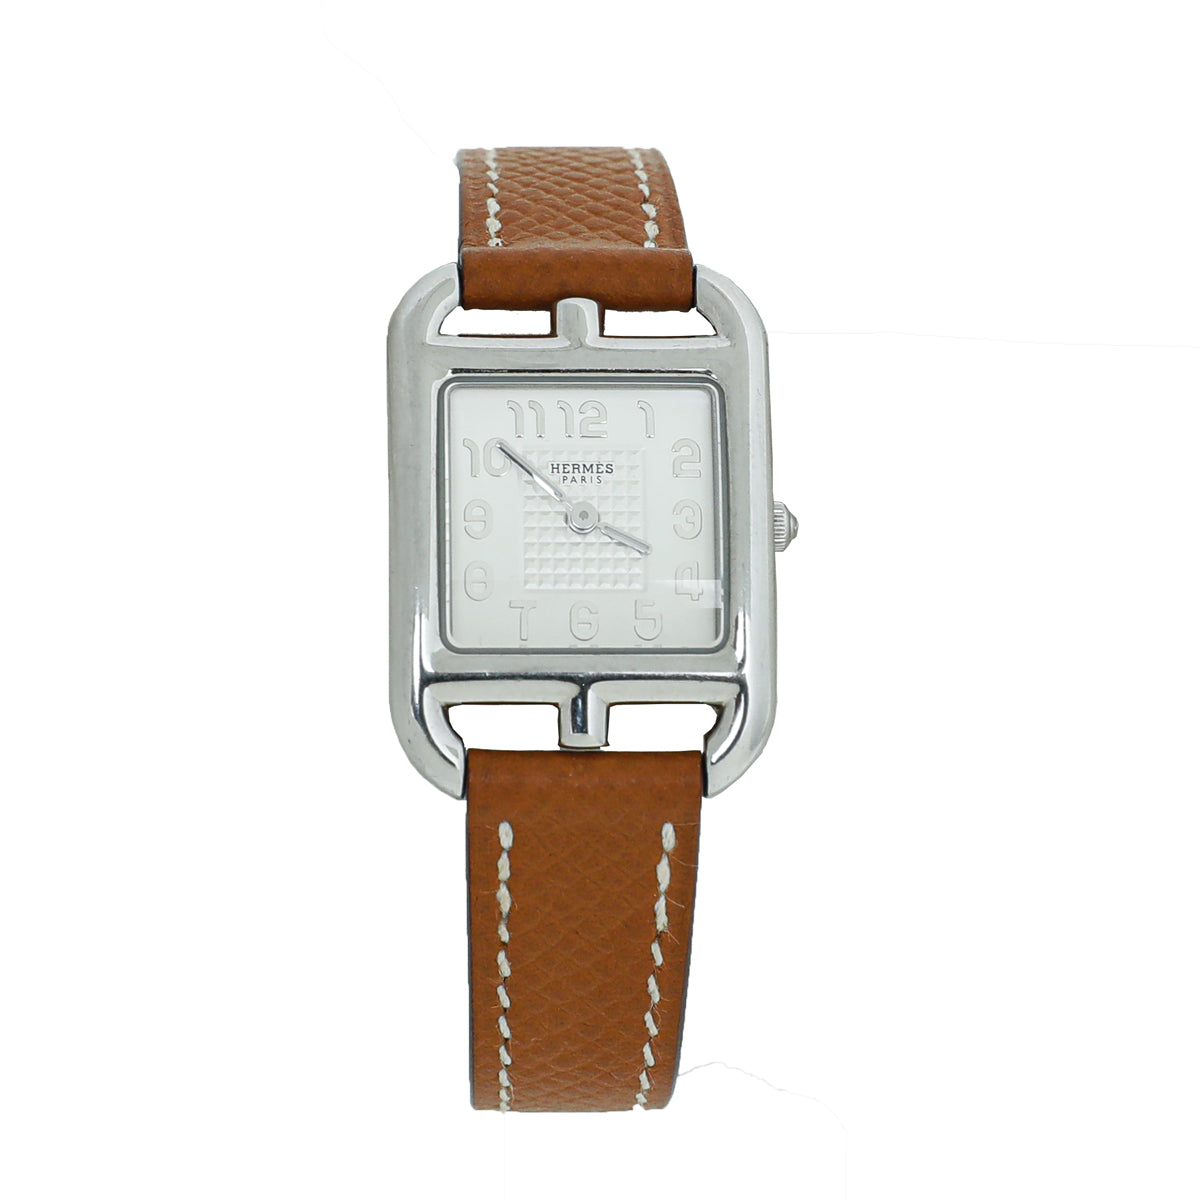 Hermes ST.ST Gold Cape Cod 35mm Watch